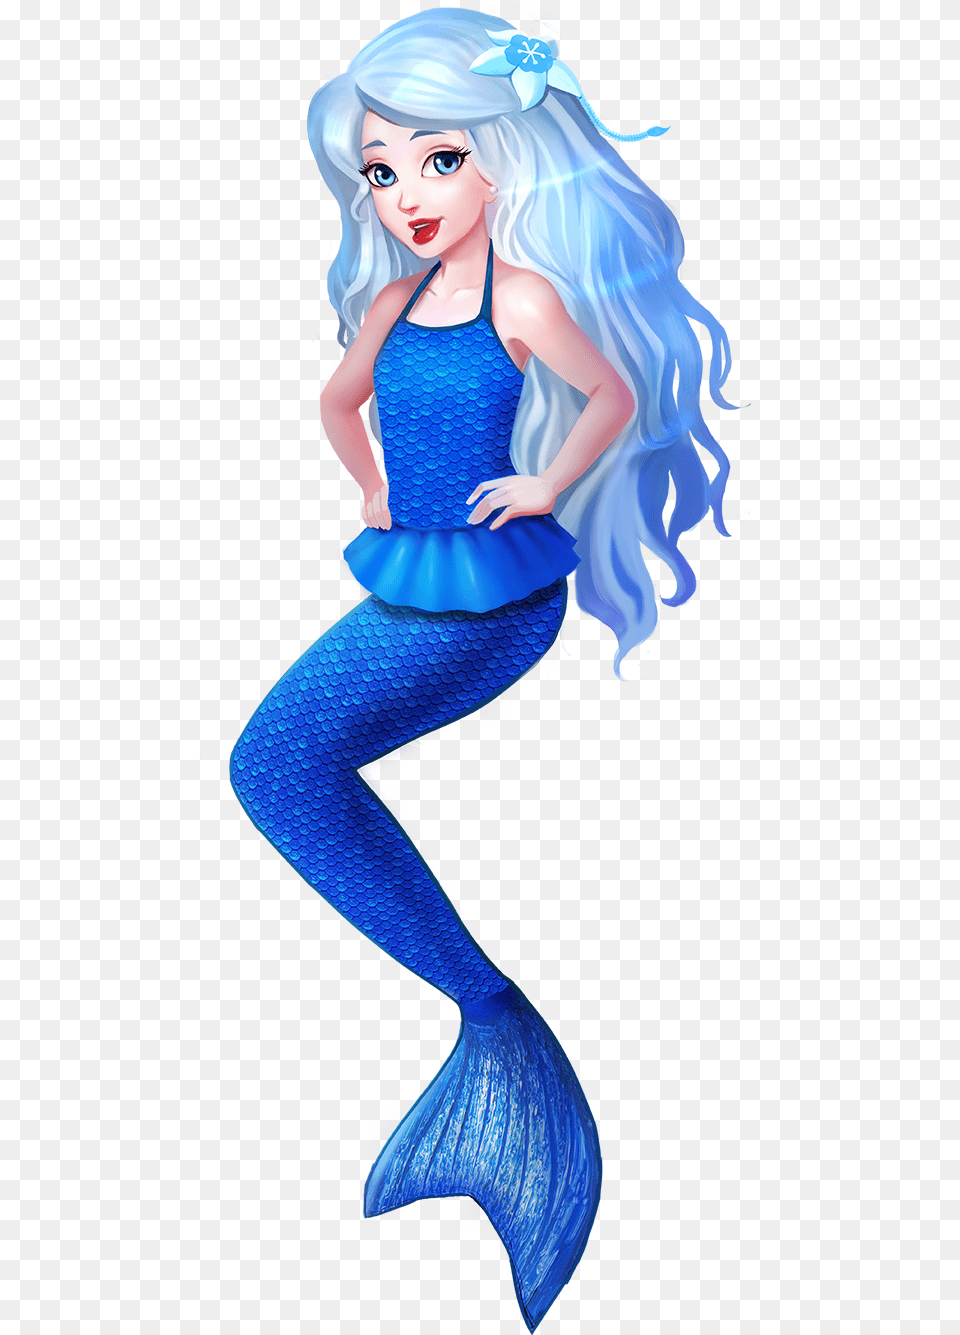 Crystal Nodded Thoughtfully And Looked Up At Her Twin Fin Fun Mermaid Crystal, Adult, Female, Person, Woman Free Transparent Png